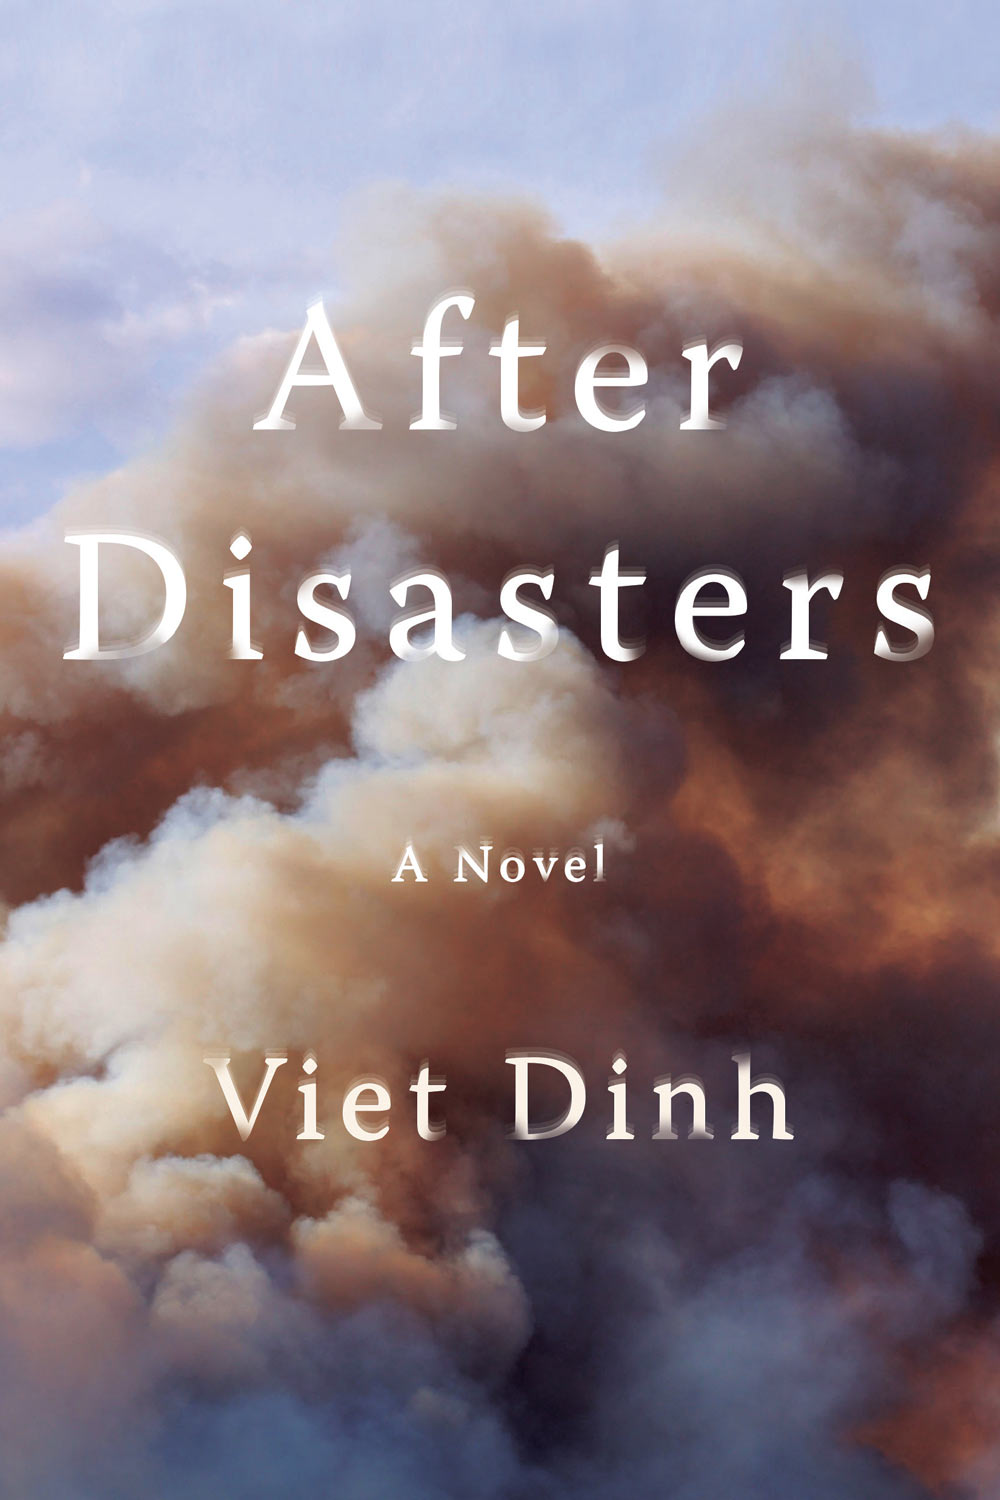 "After Disasters" in white letters skyscape background Viet Dinh novel